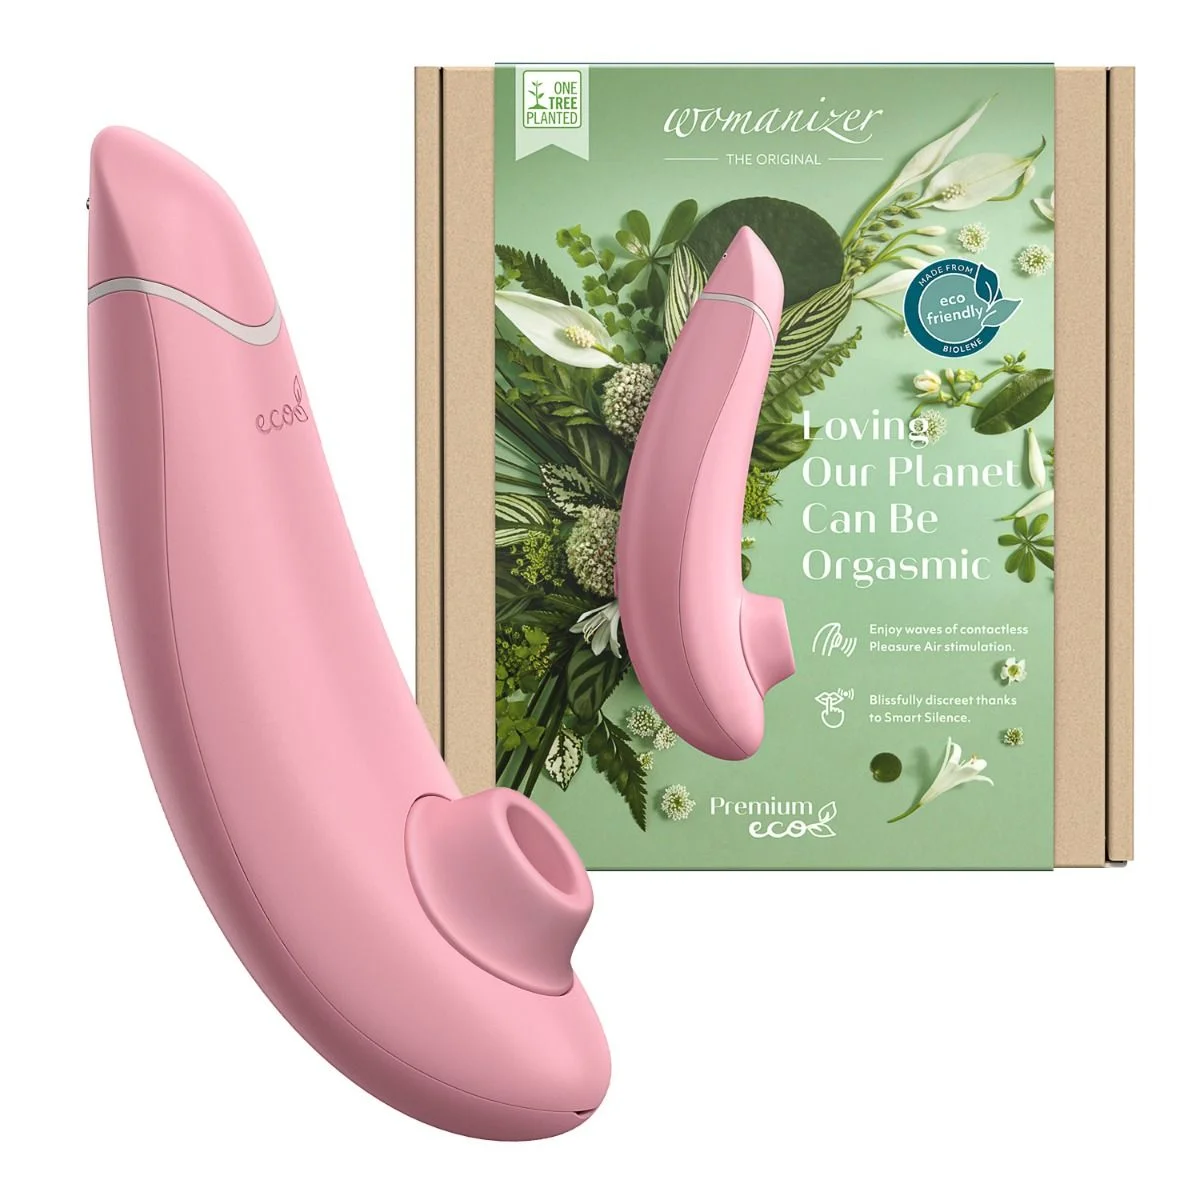 Womanizer Premium ECO friendly sex toy in pink with packaging